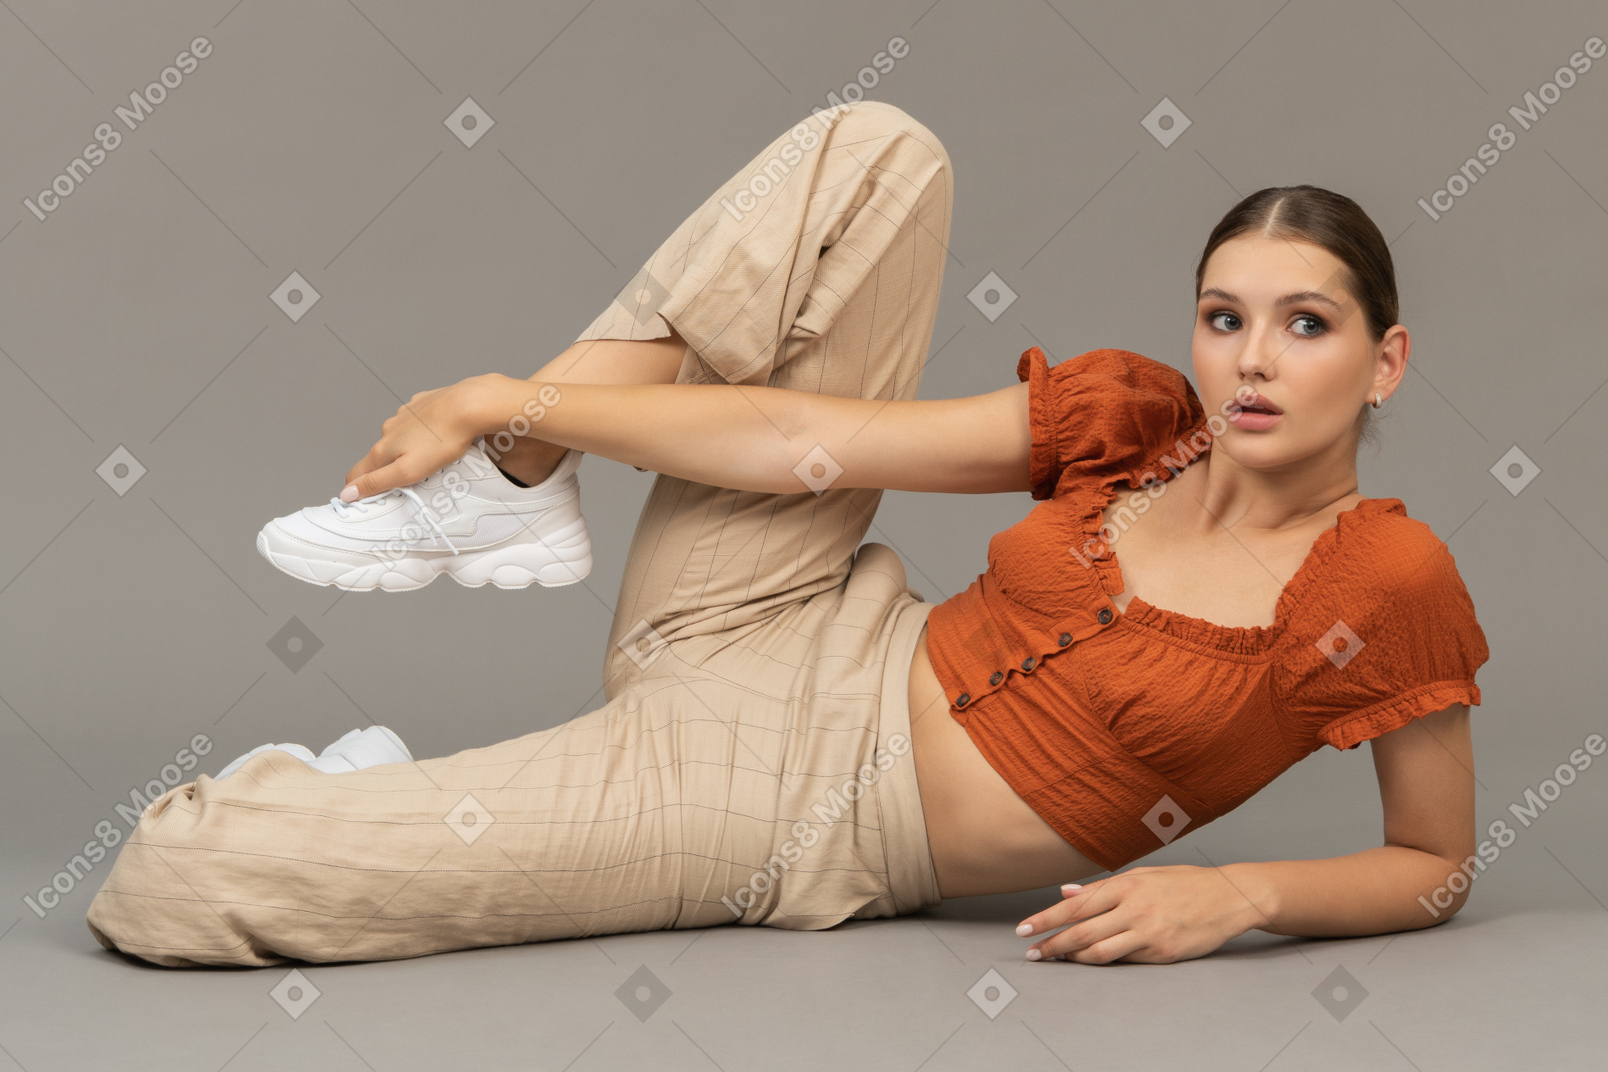 Young woman holding her leg